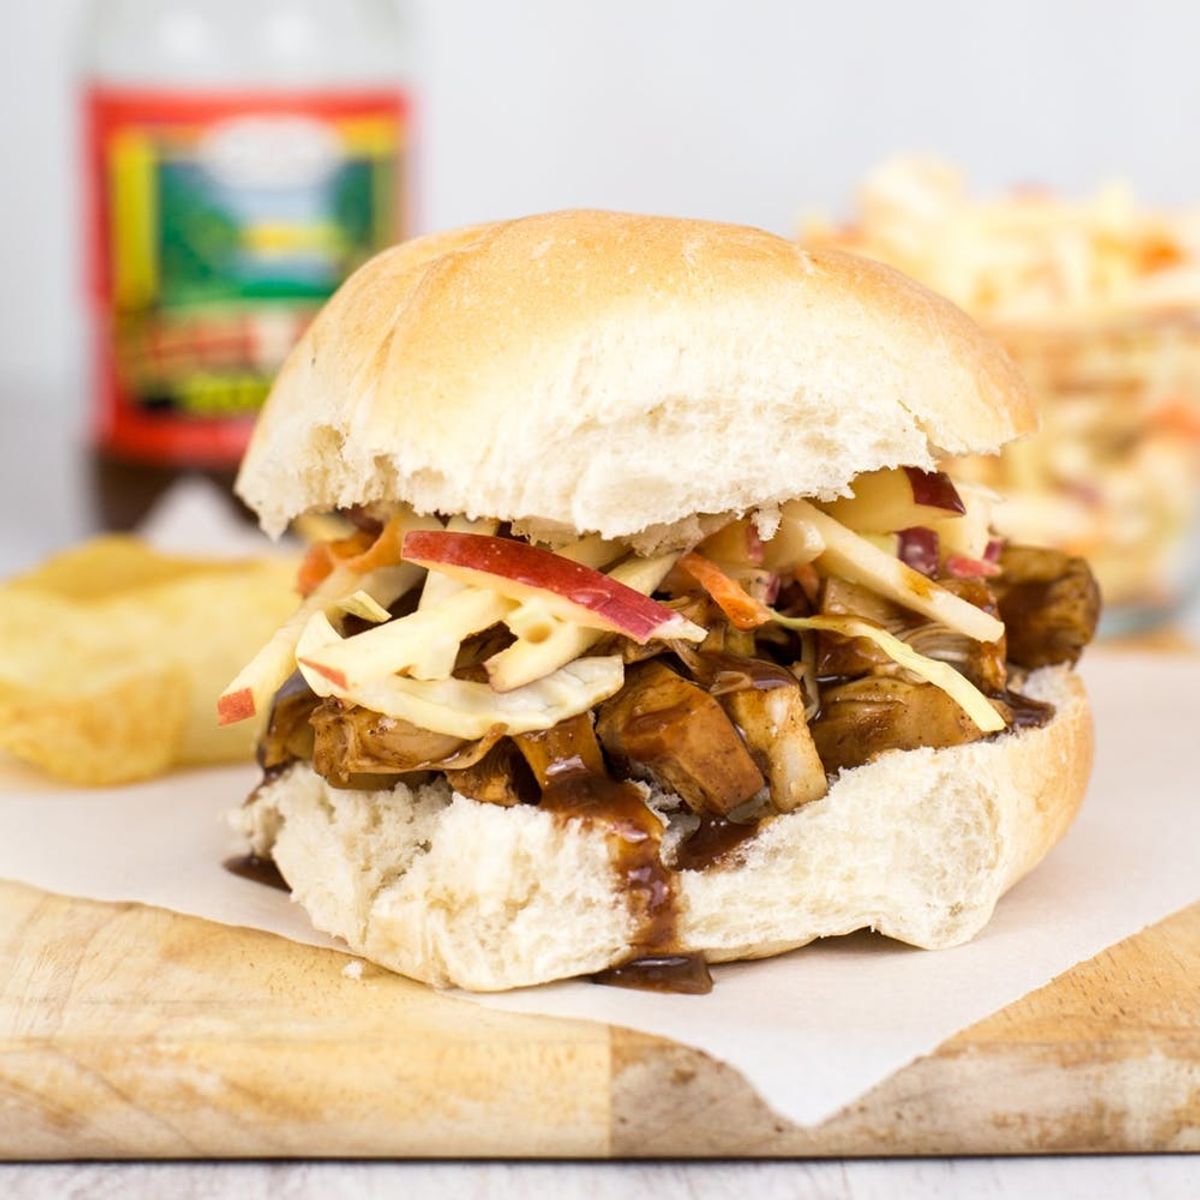 You’ll Never Guess What These Vegetarian Pulled “Pork” Sandwiches Are Made From